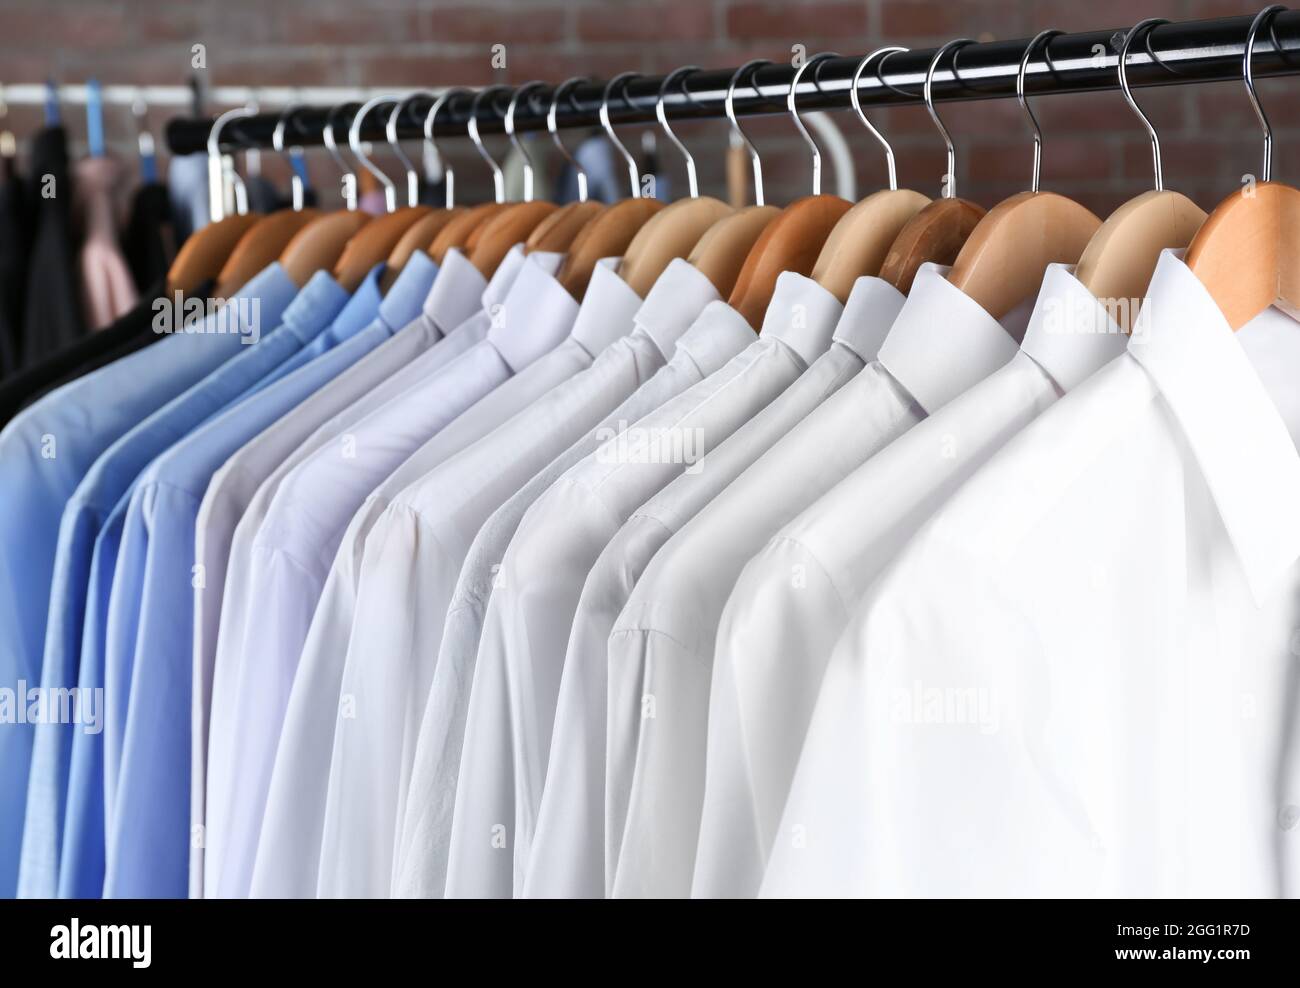 https://c8.alamy.com/comp/2GG1R7D/rack-of-clean-clothes-hanging-on-hangers-at-dry-cleaning-2GG1R7D.jpg